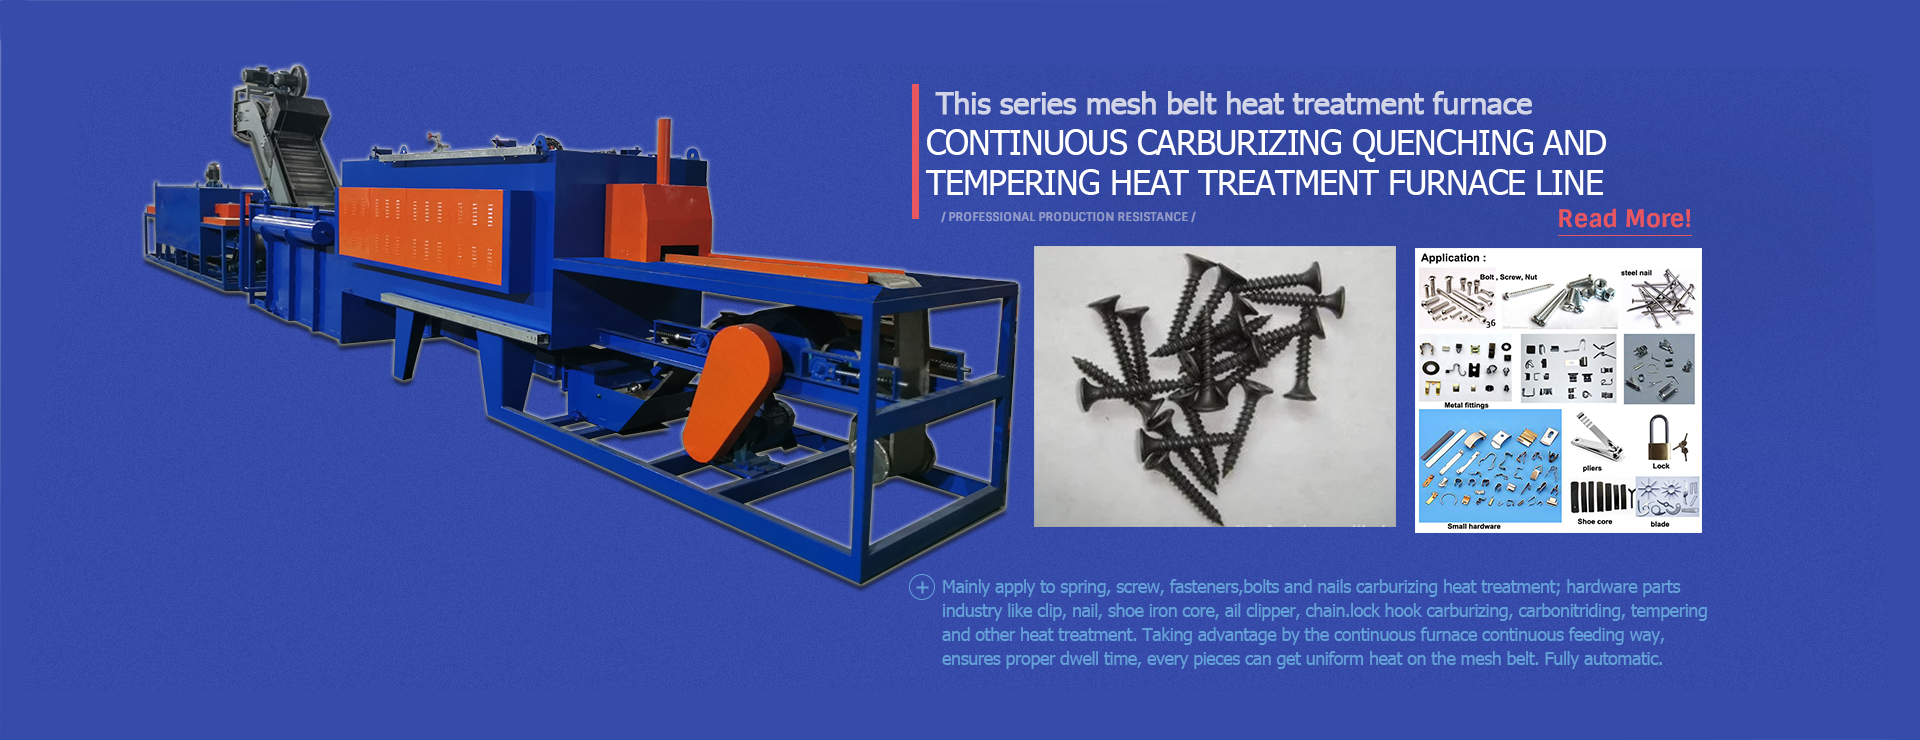 Mesh belt carburizing quenching and tempering furnace